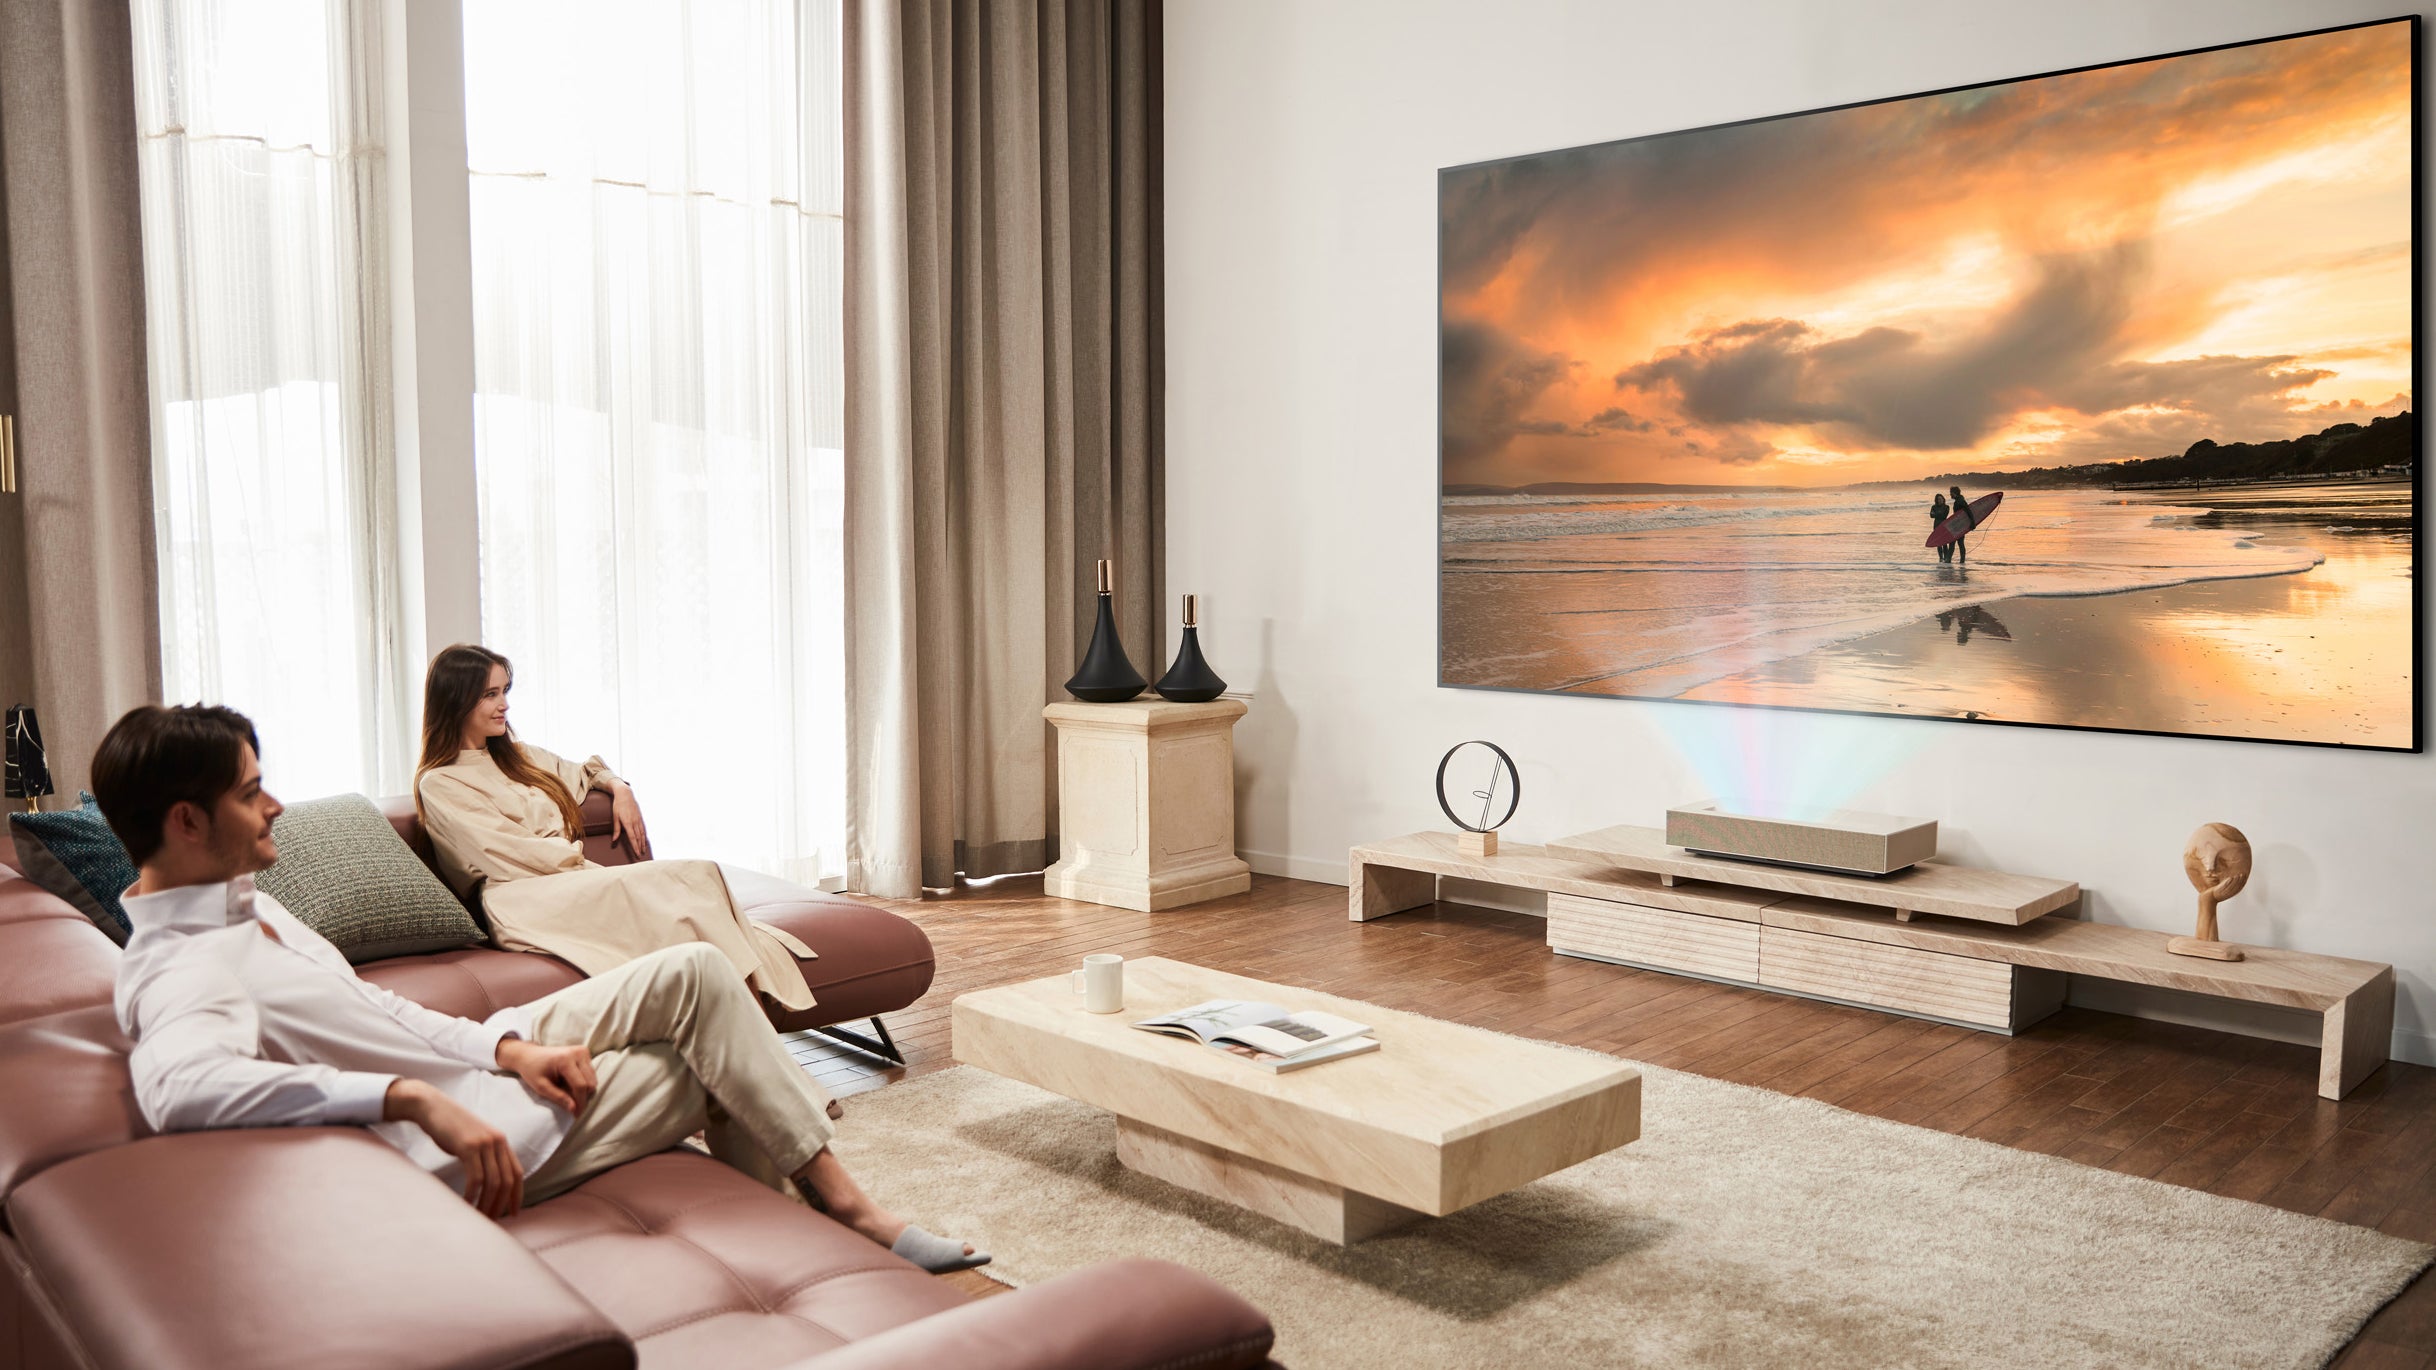 LG’s New Short Throw Projector Creates a 100-Inch Image Just Four Inches From a Wall